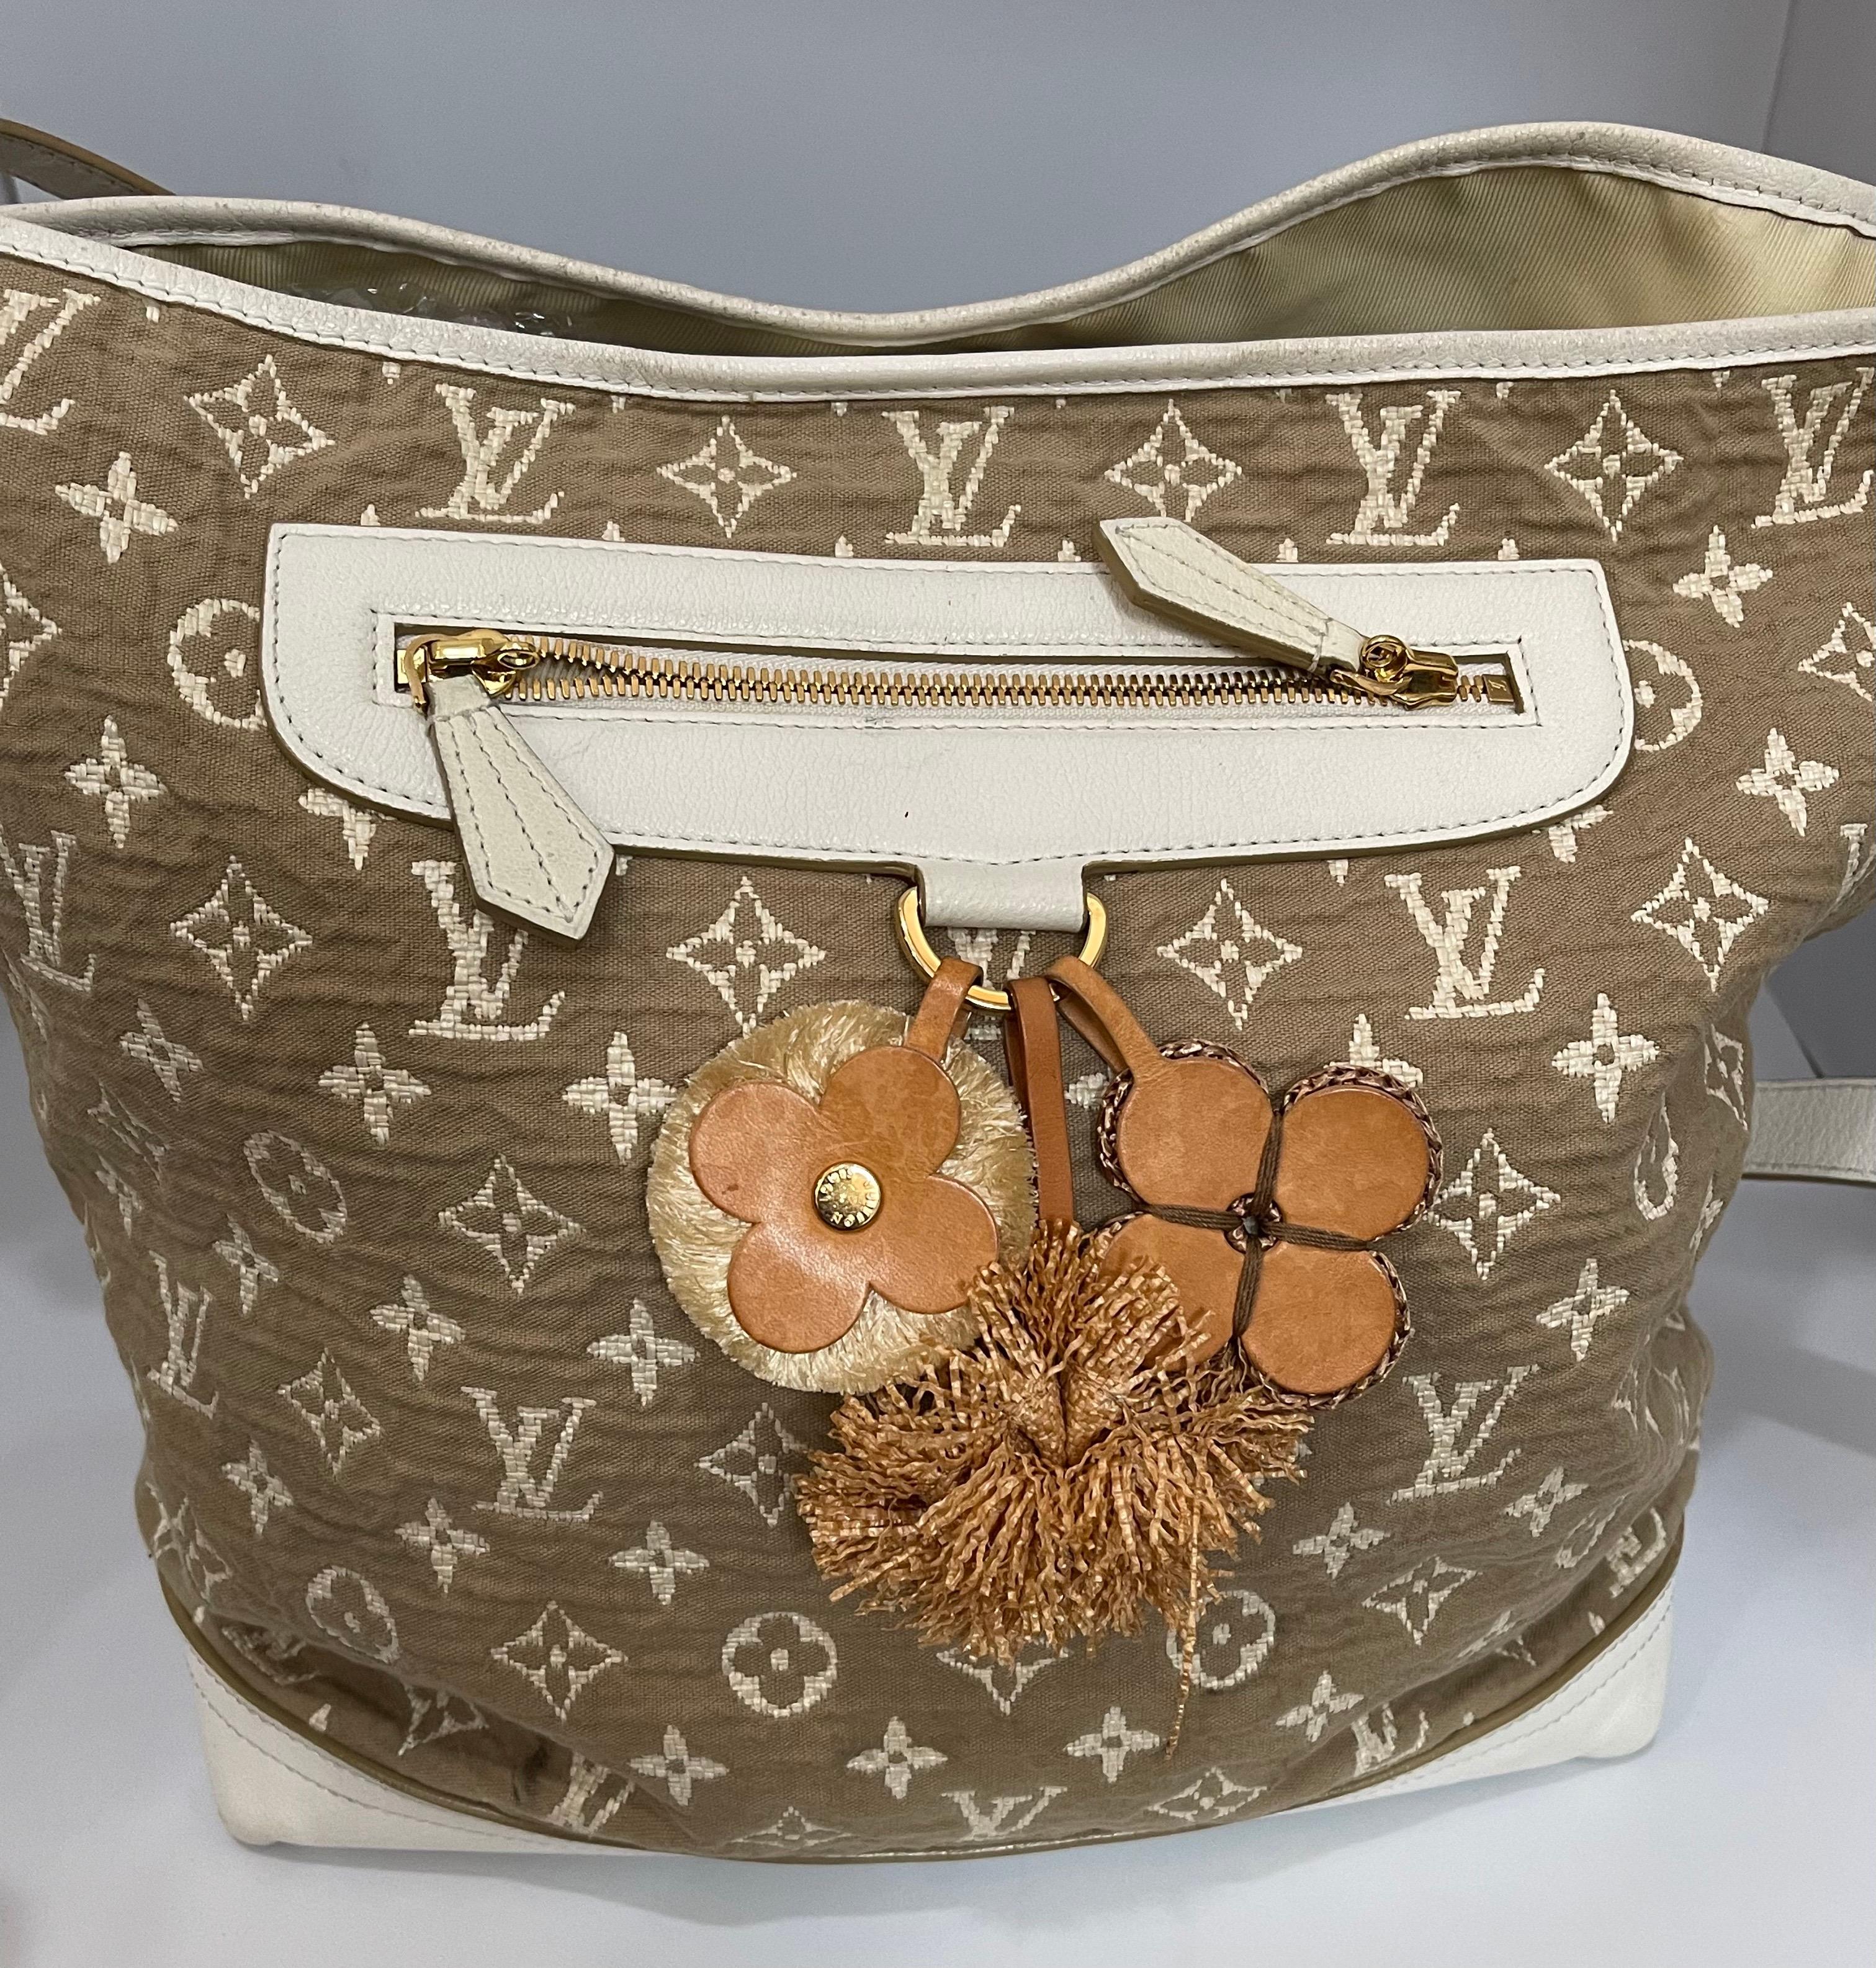 This is an authentic, pre-owned LOUIS VUITTON 
The vintage-inspired Cruise 2011 Monogram Sabbia bags are made from cotton based jacquard fabric that underwent a subtle coloration process to achieve a nice earthy color. The white leather trim and